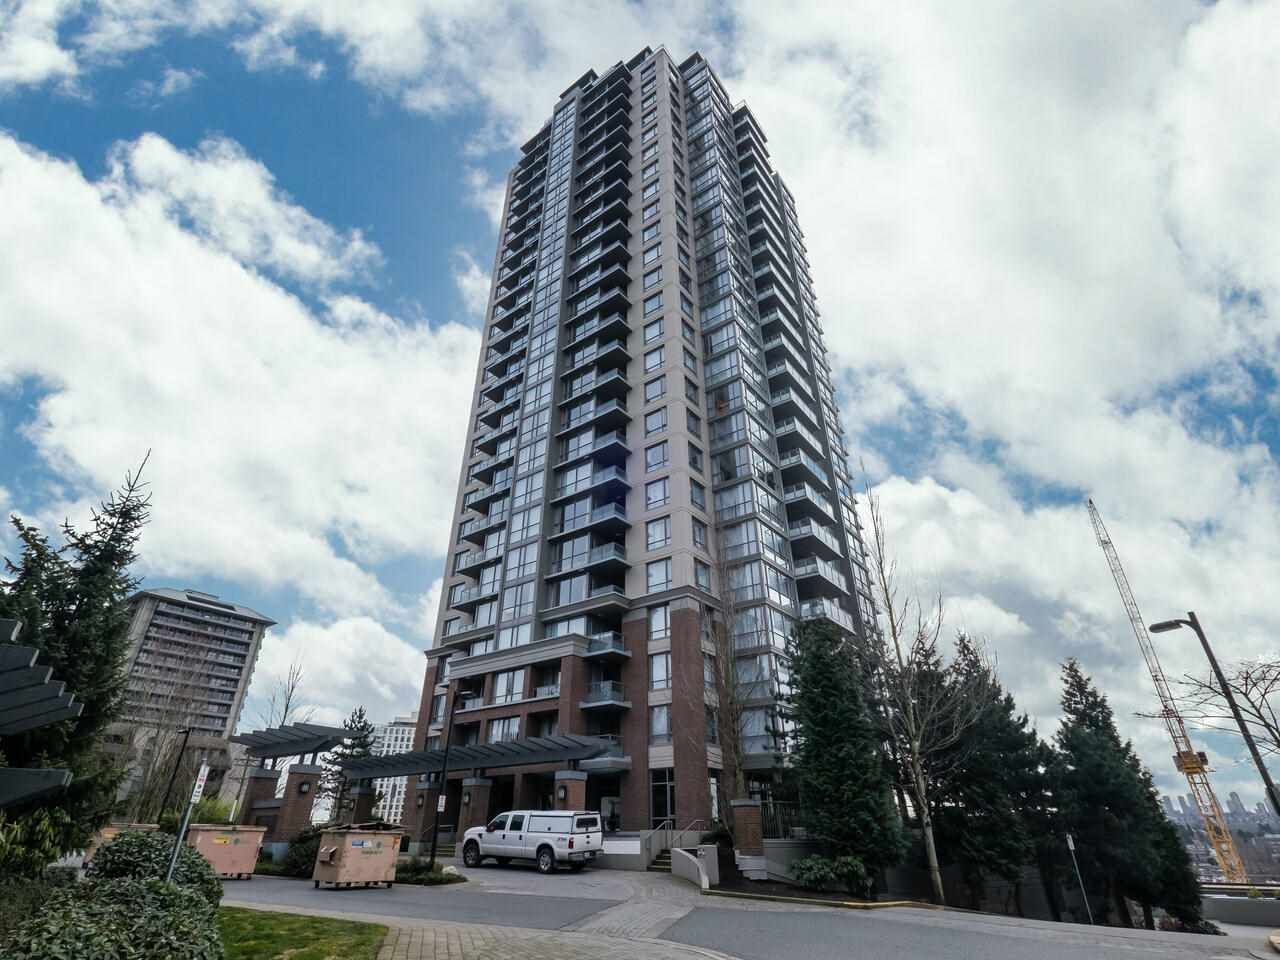 Main Photo: 2302 4888 BRENTWOOD Drive in Burnaby: Brentwood Park Condo for sale (Burnaby North)  : MLS®# R2547400